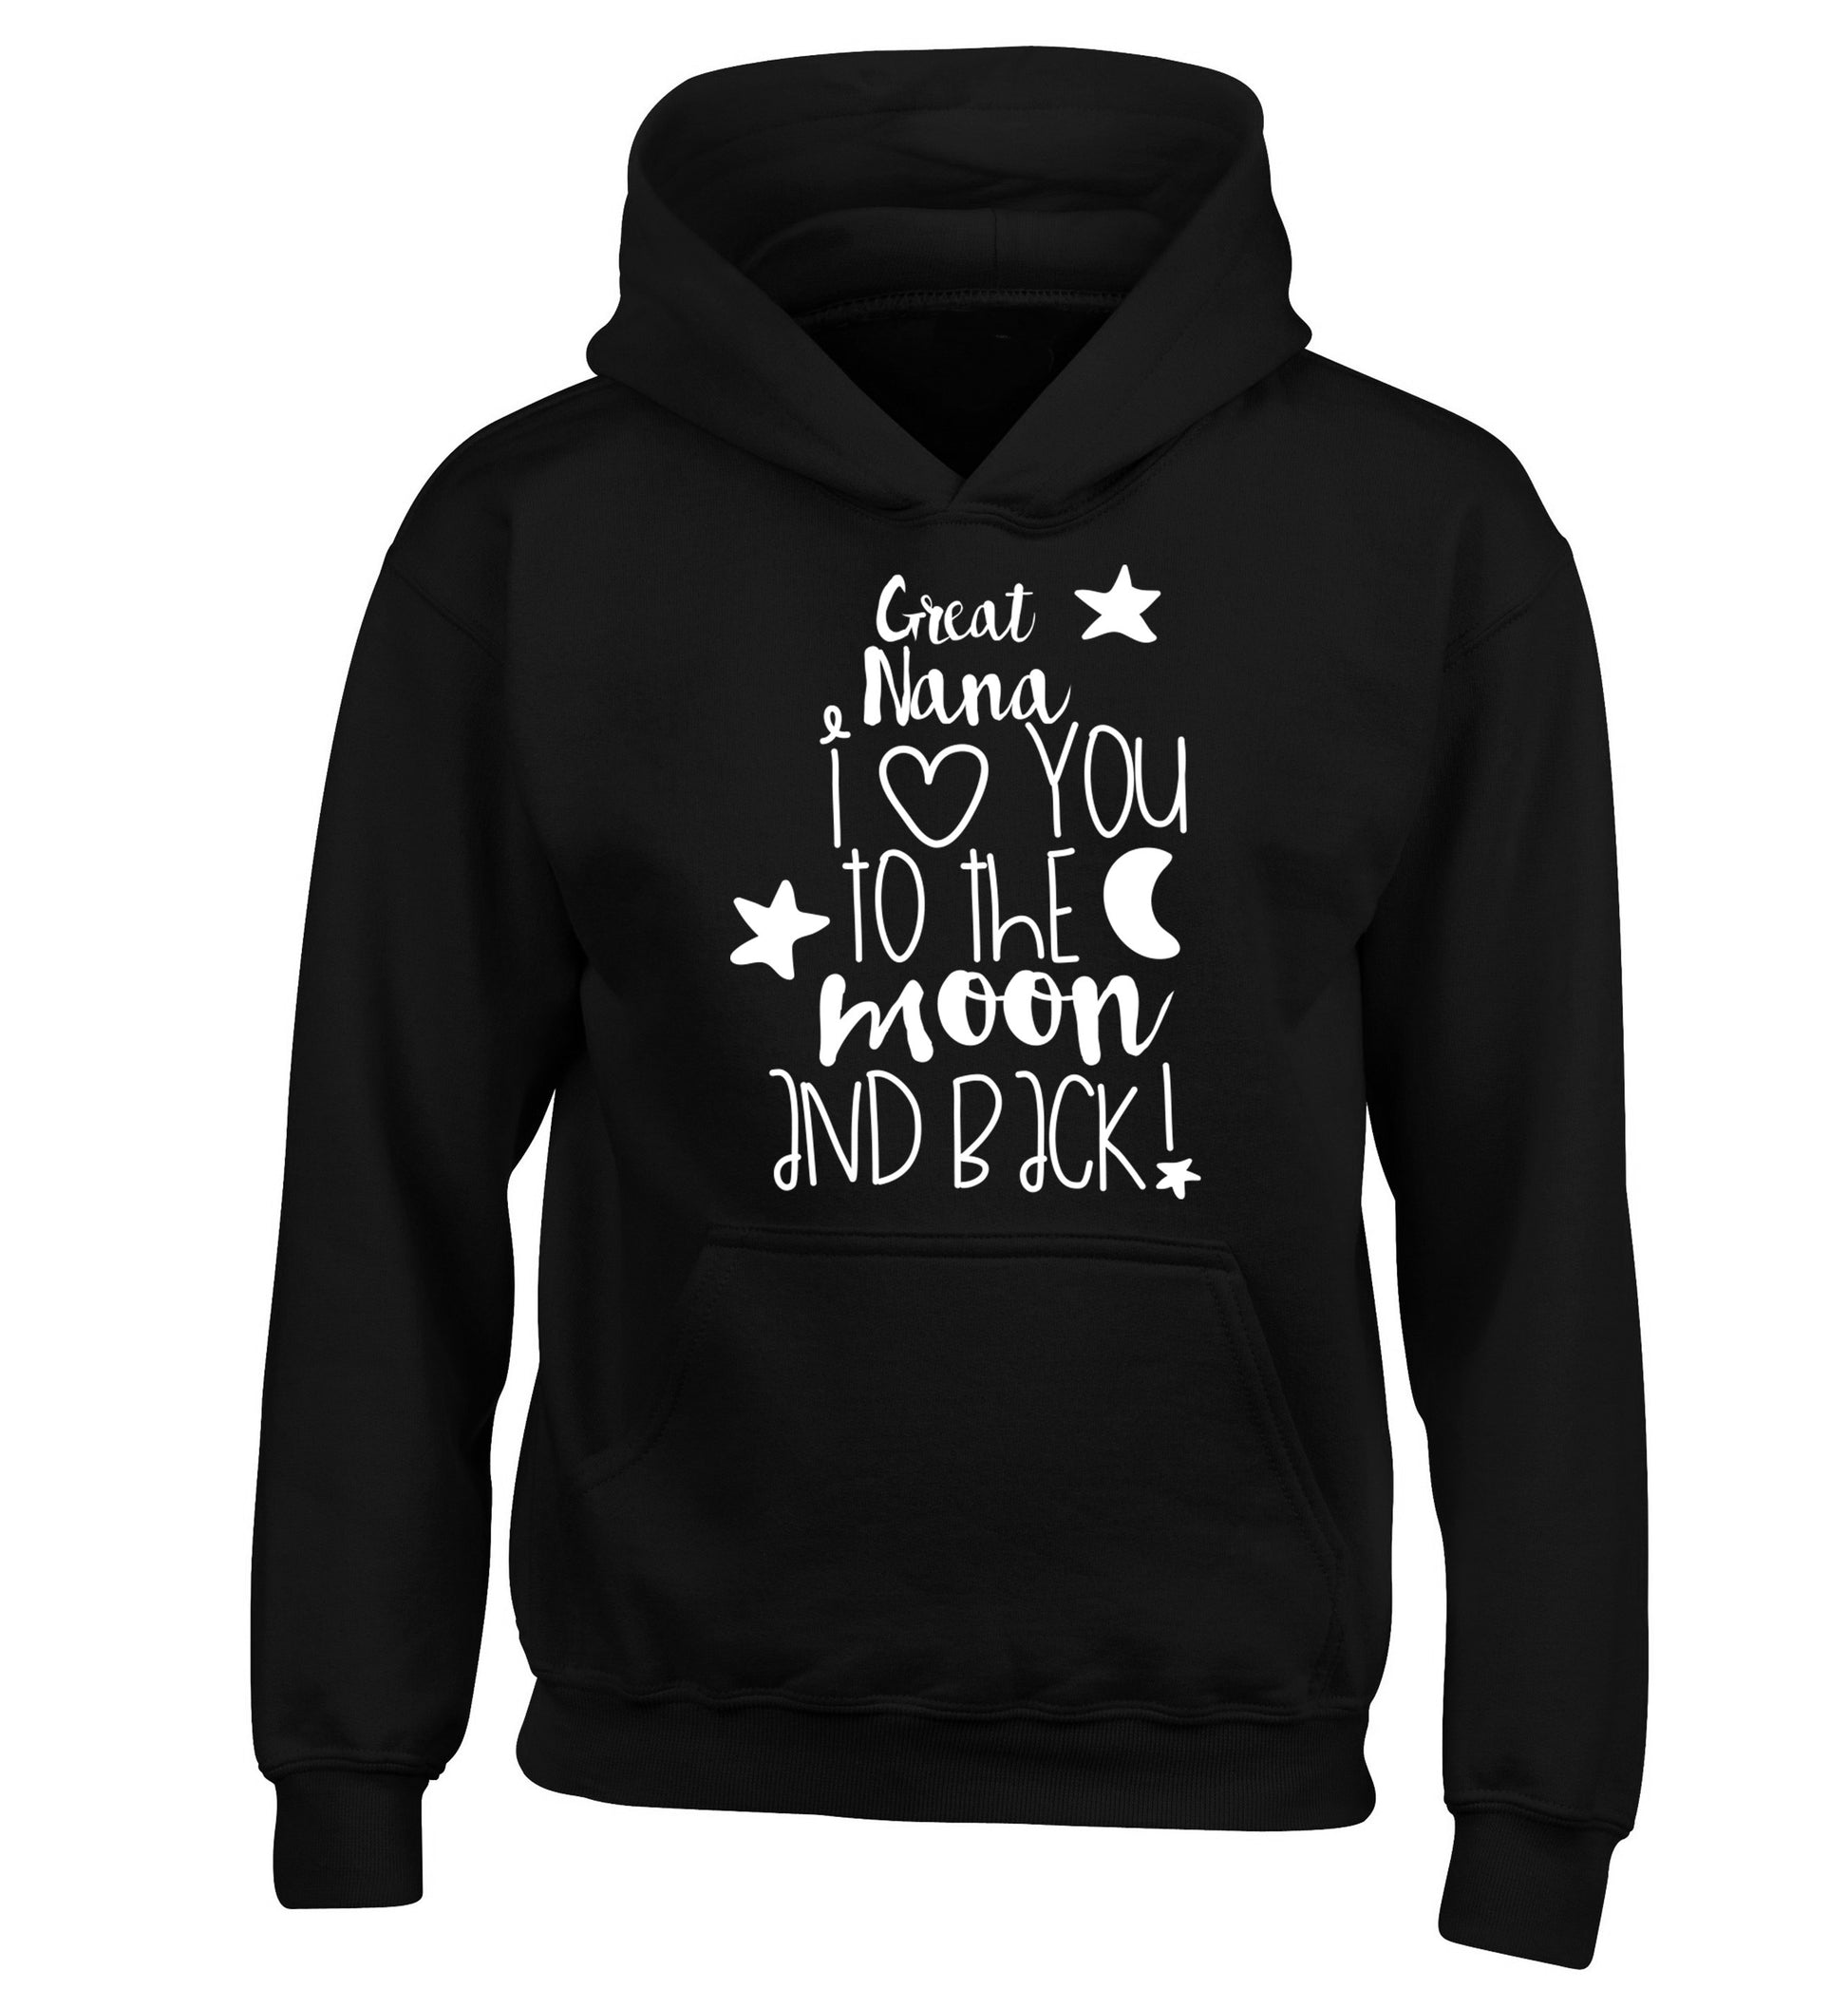 Great Nana I love you to the moon and back children's black hoodie 12-14 Years